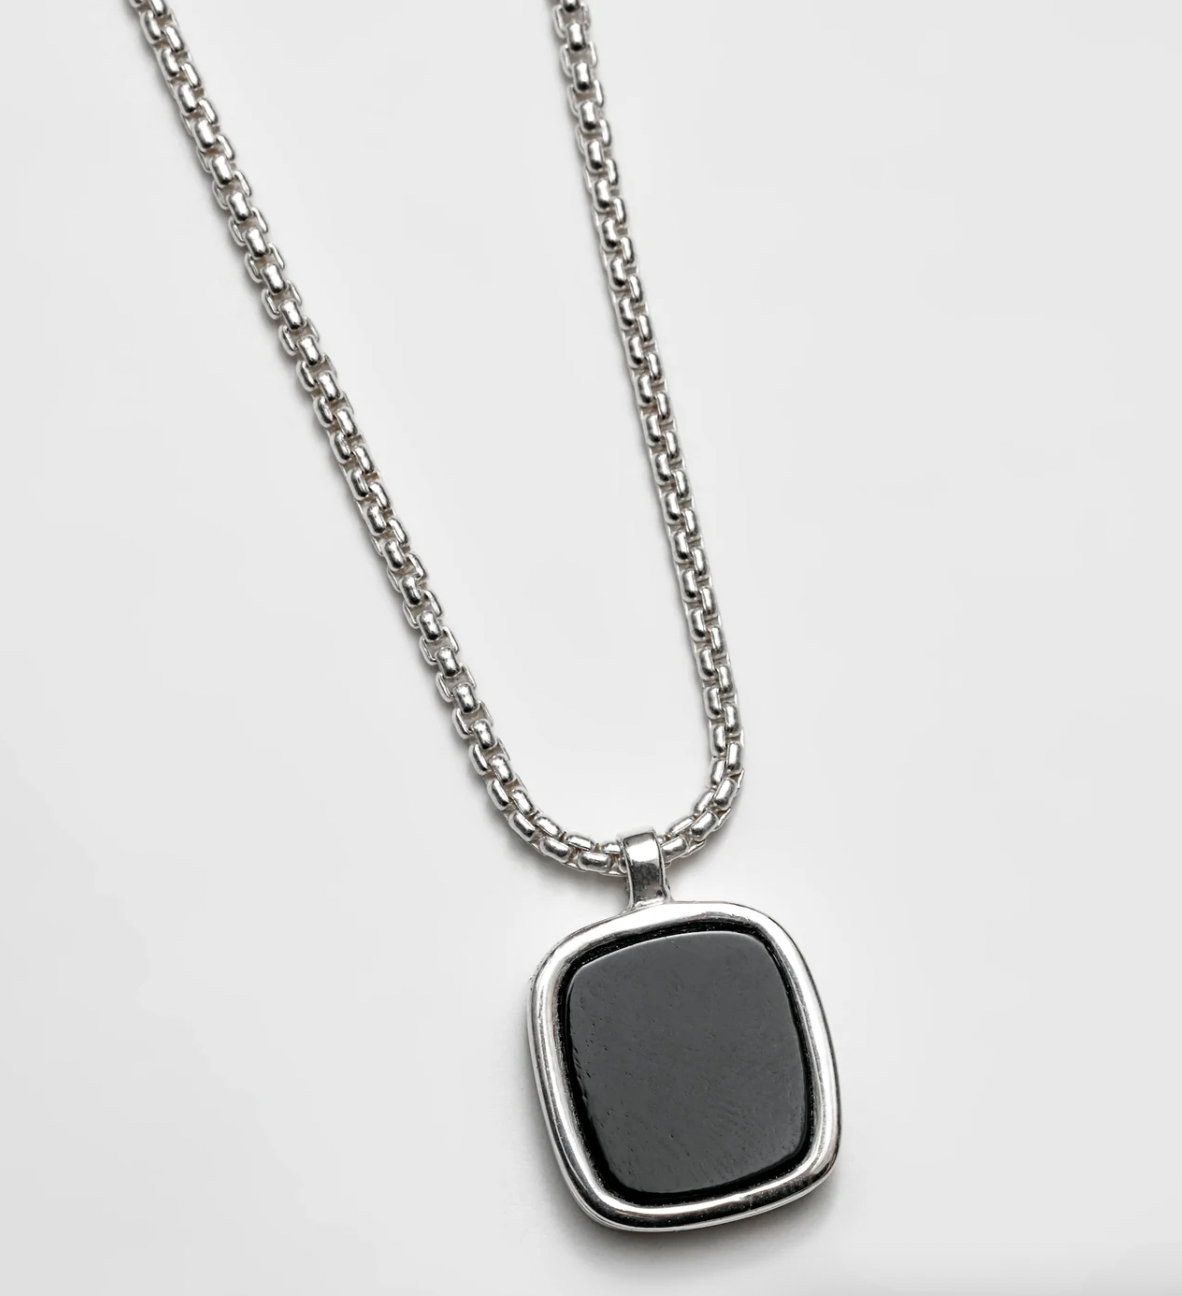 Product Image for Wells Necklace, Onyx + Sterling Silver